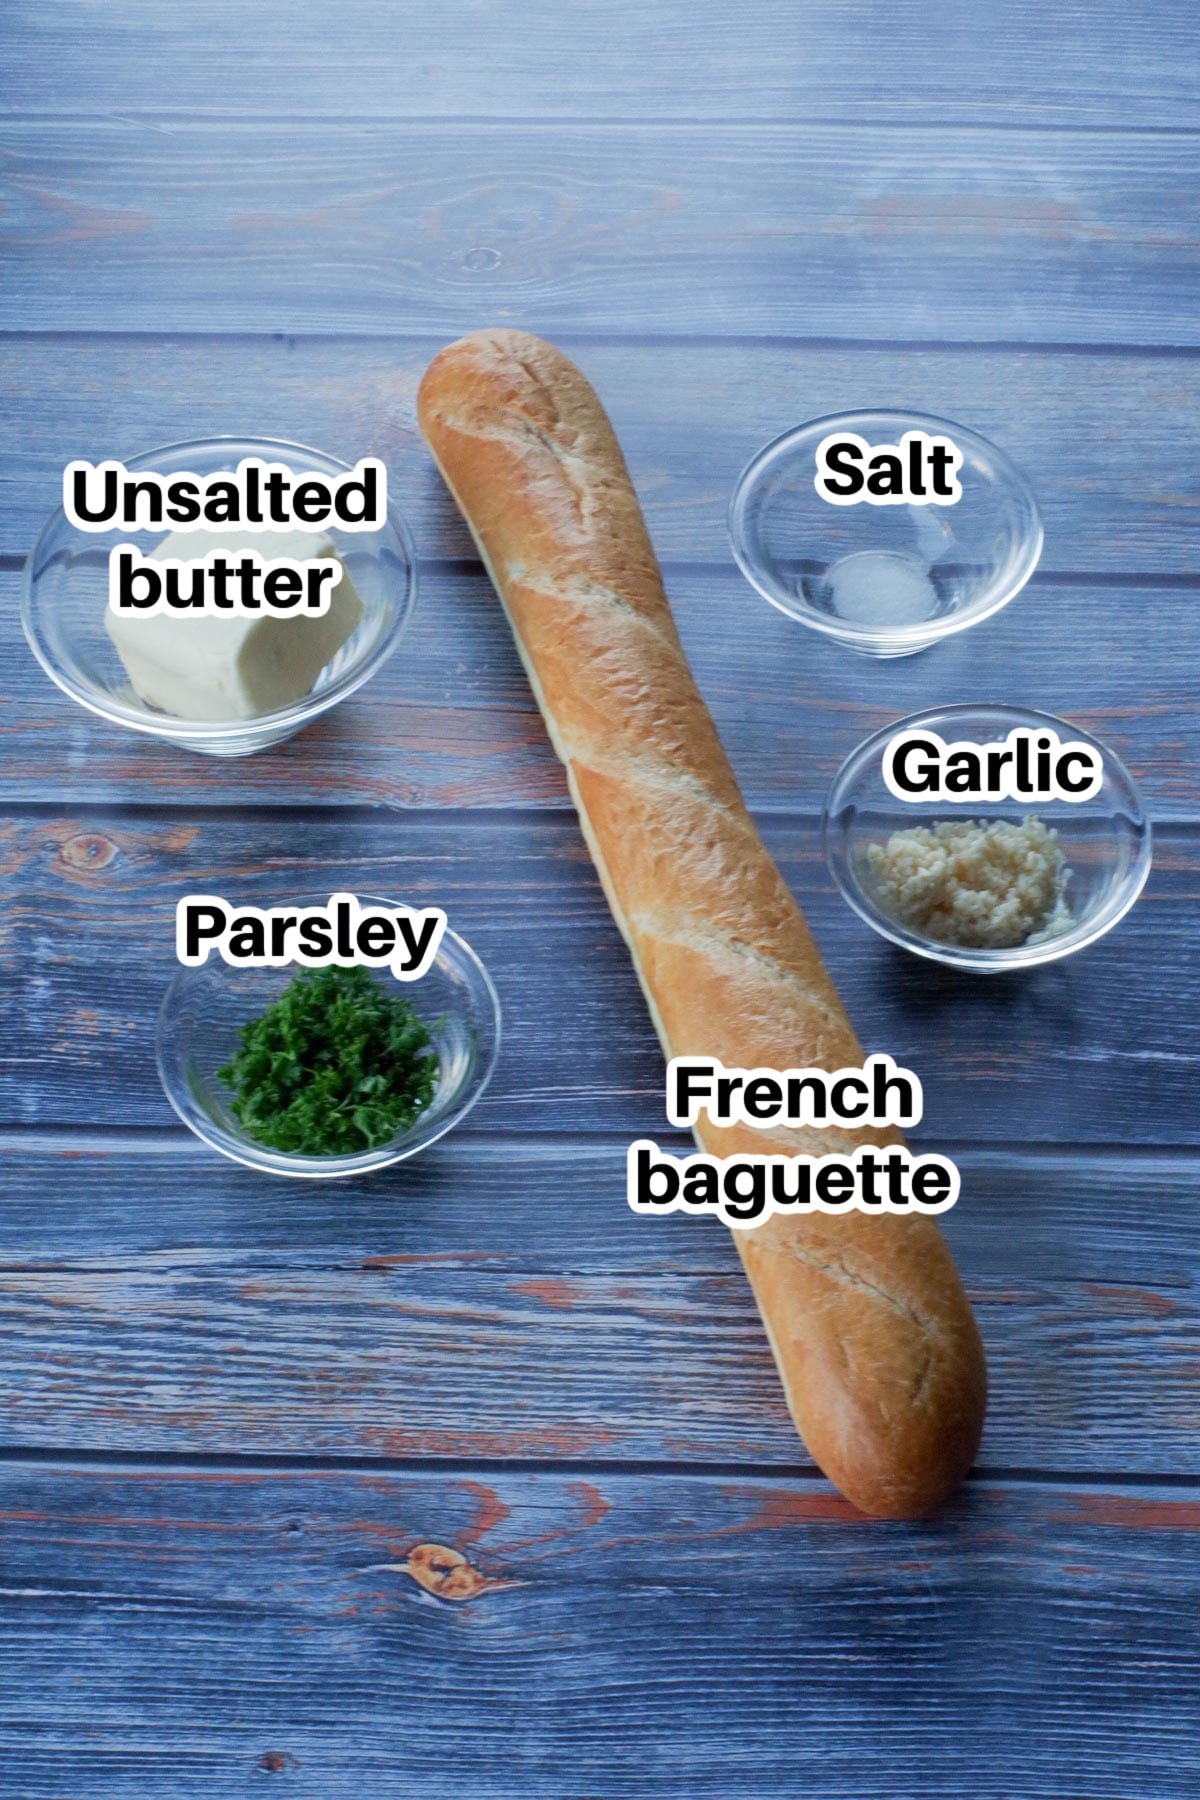 ingredients in garlic bread baguette (bread directly on the surface and other ingredients in glass bowls) on faux blue wooden surface